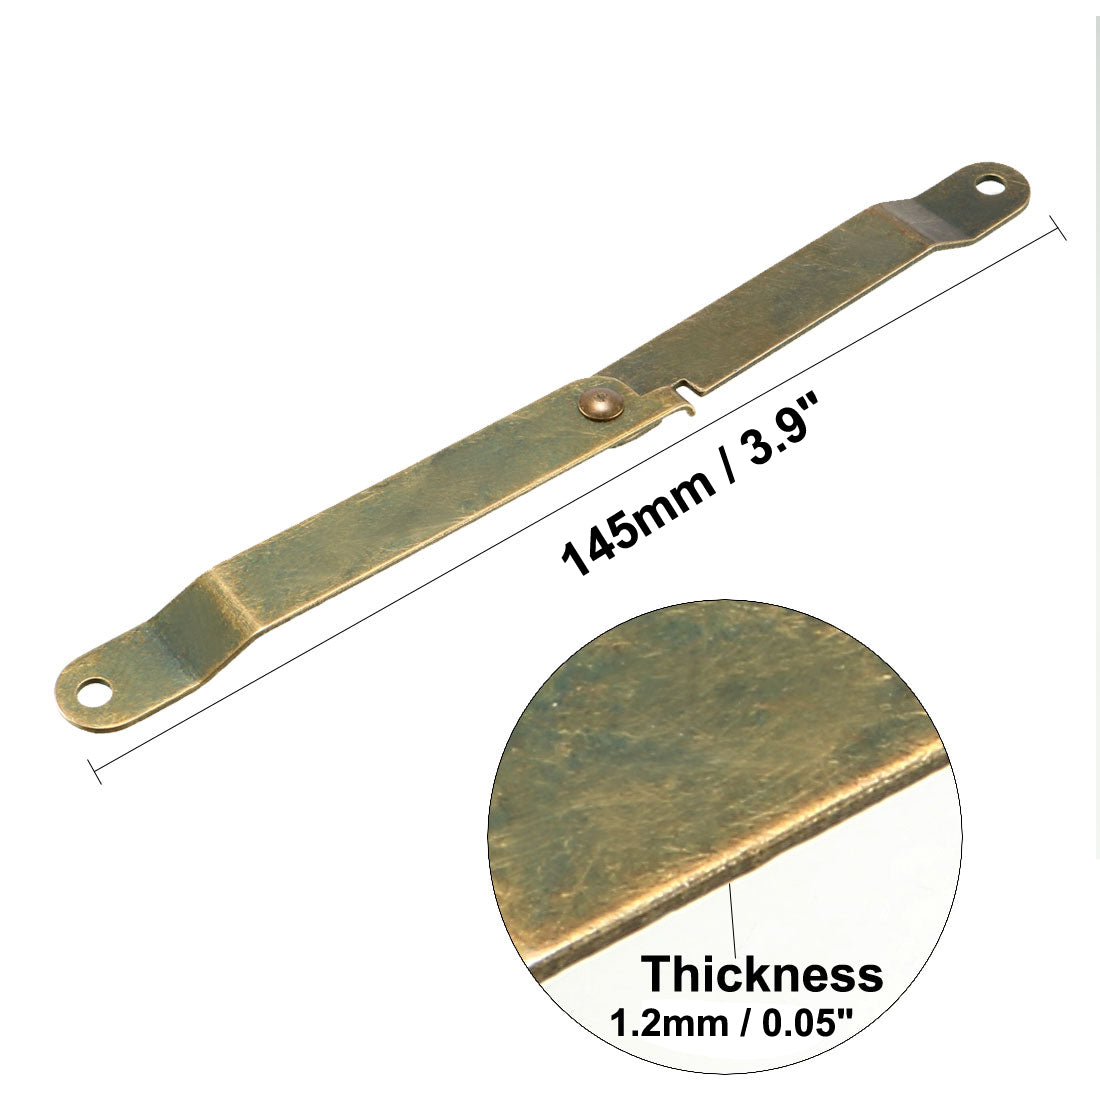 uxcell Uxcell Folding Support Hinge Furniture Decorative Box Lid Hinges Bronze 83mmx11mm 10 Pcs